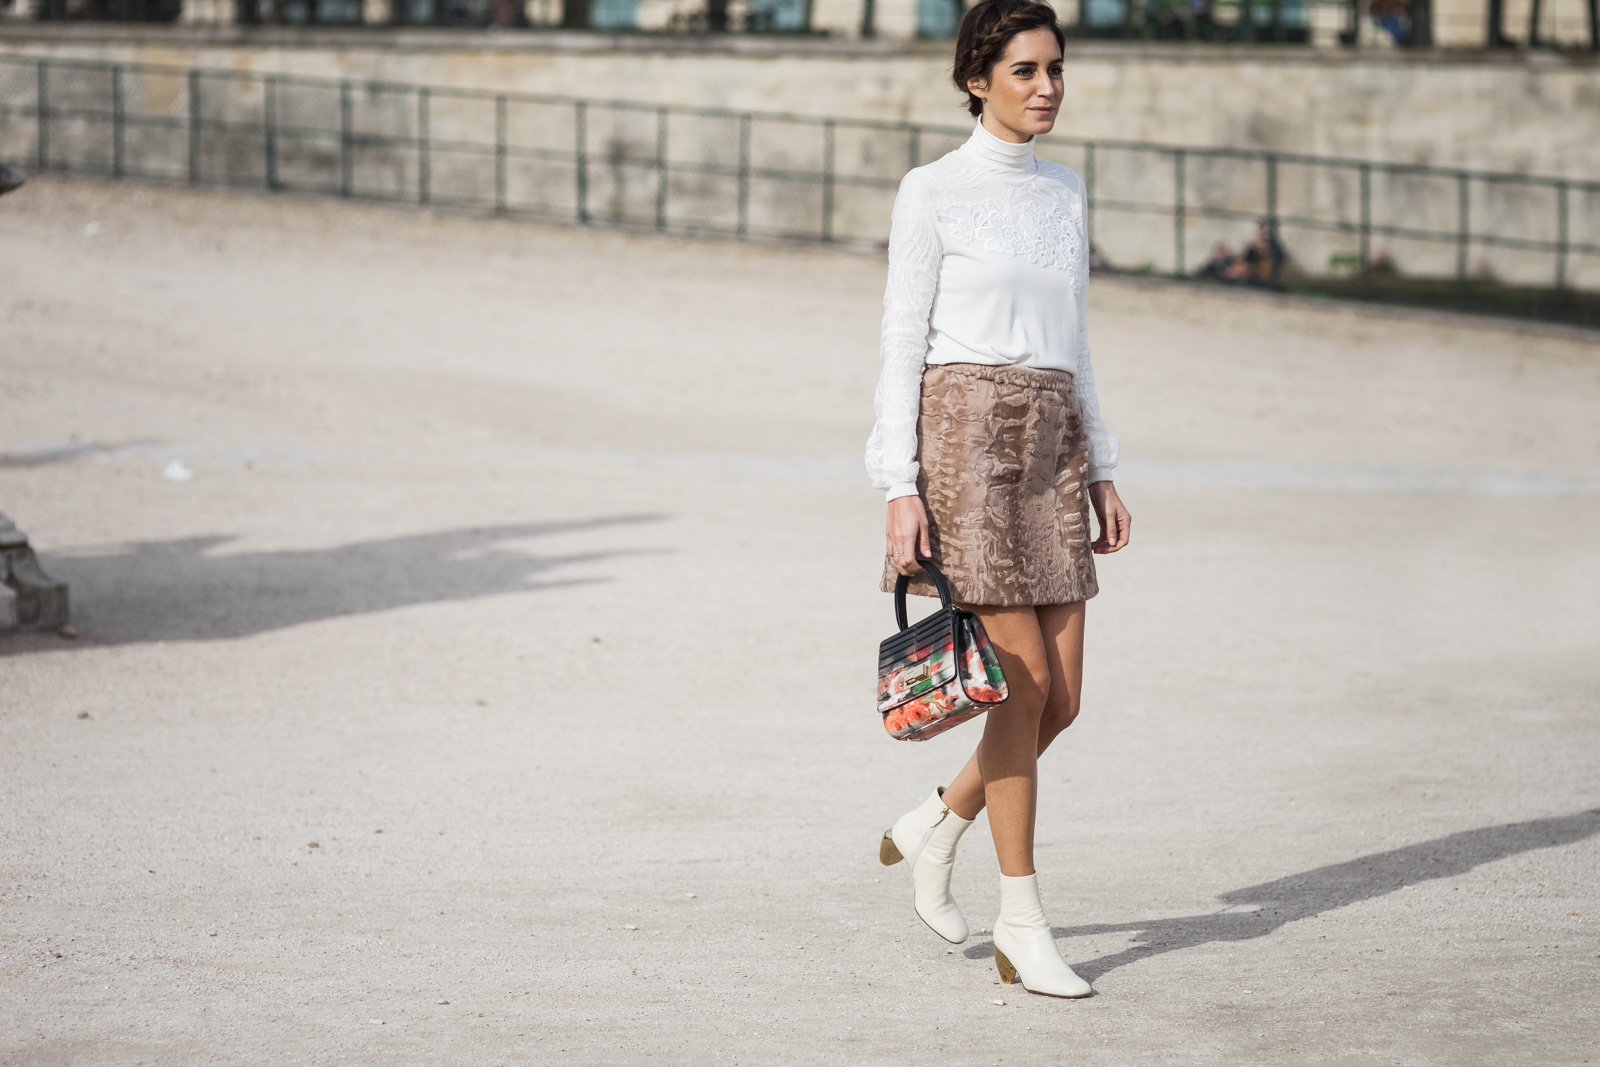 Gala Gonzalez wearing Elie Saab top, skirt ang bag and white Valentino ankle boots before the Elie Saab Fall/Winter 2015-2016 fashion show at the Tuileries in Paris, France 